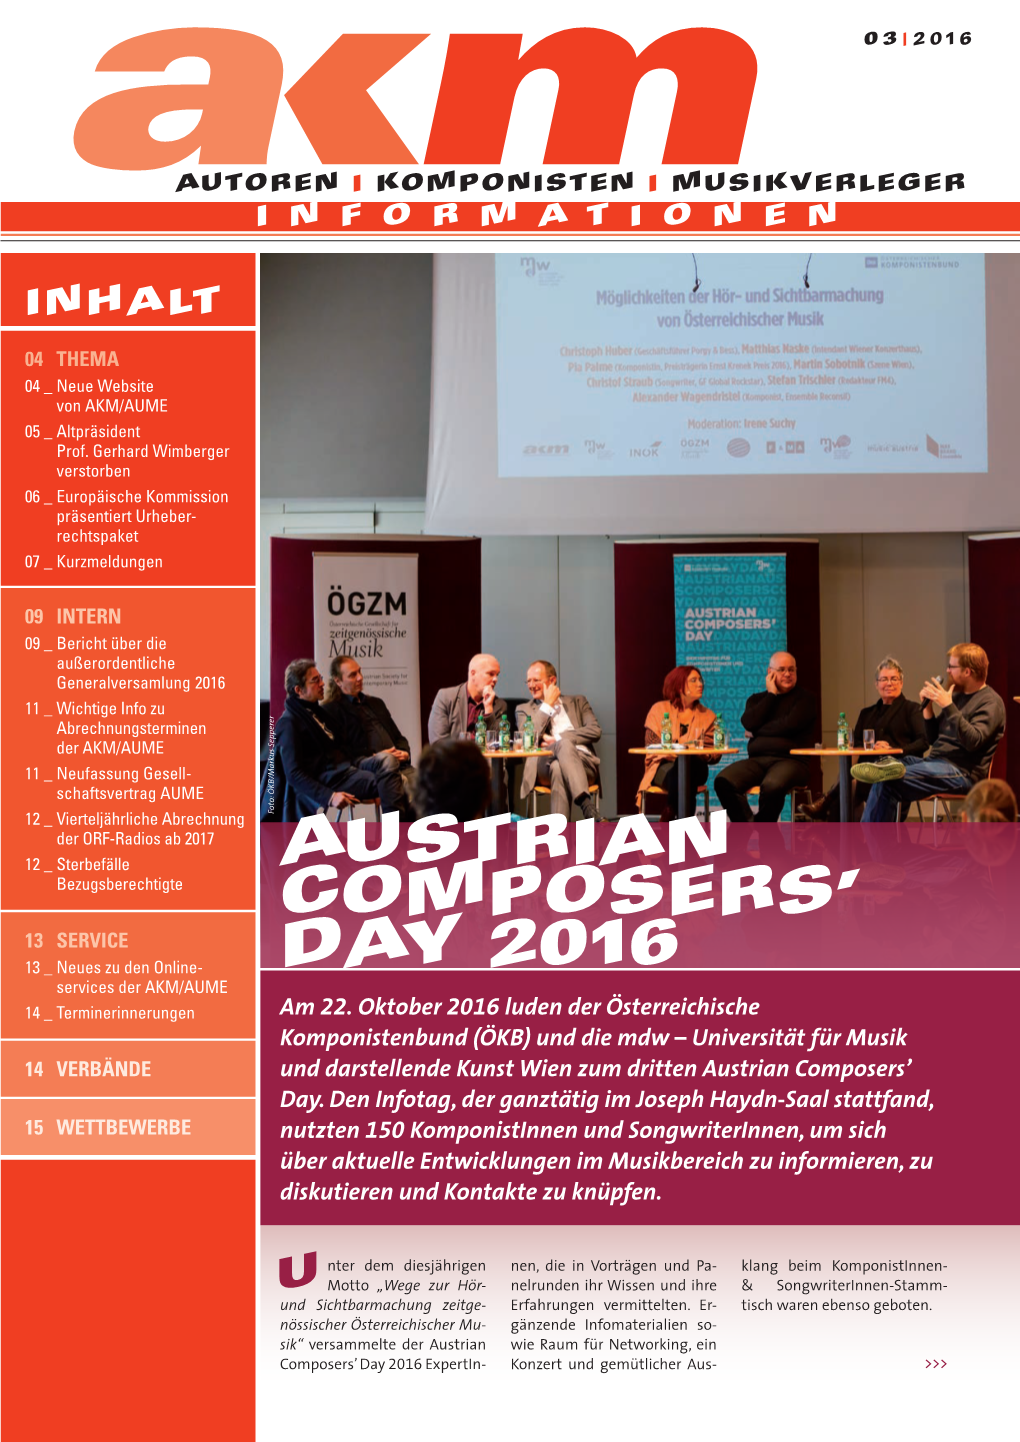 AUSTRIAN Composers' Day 2016